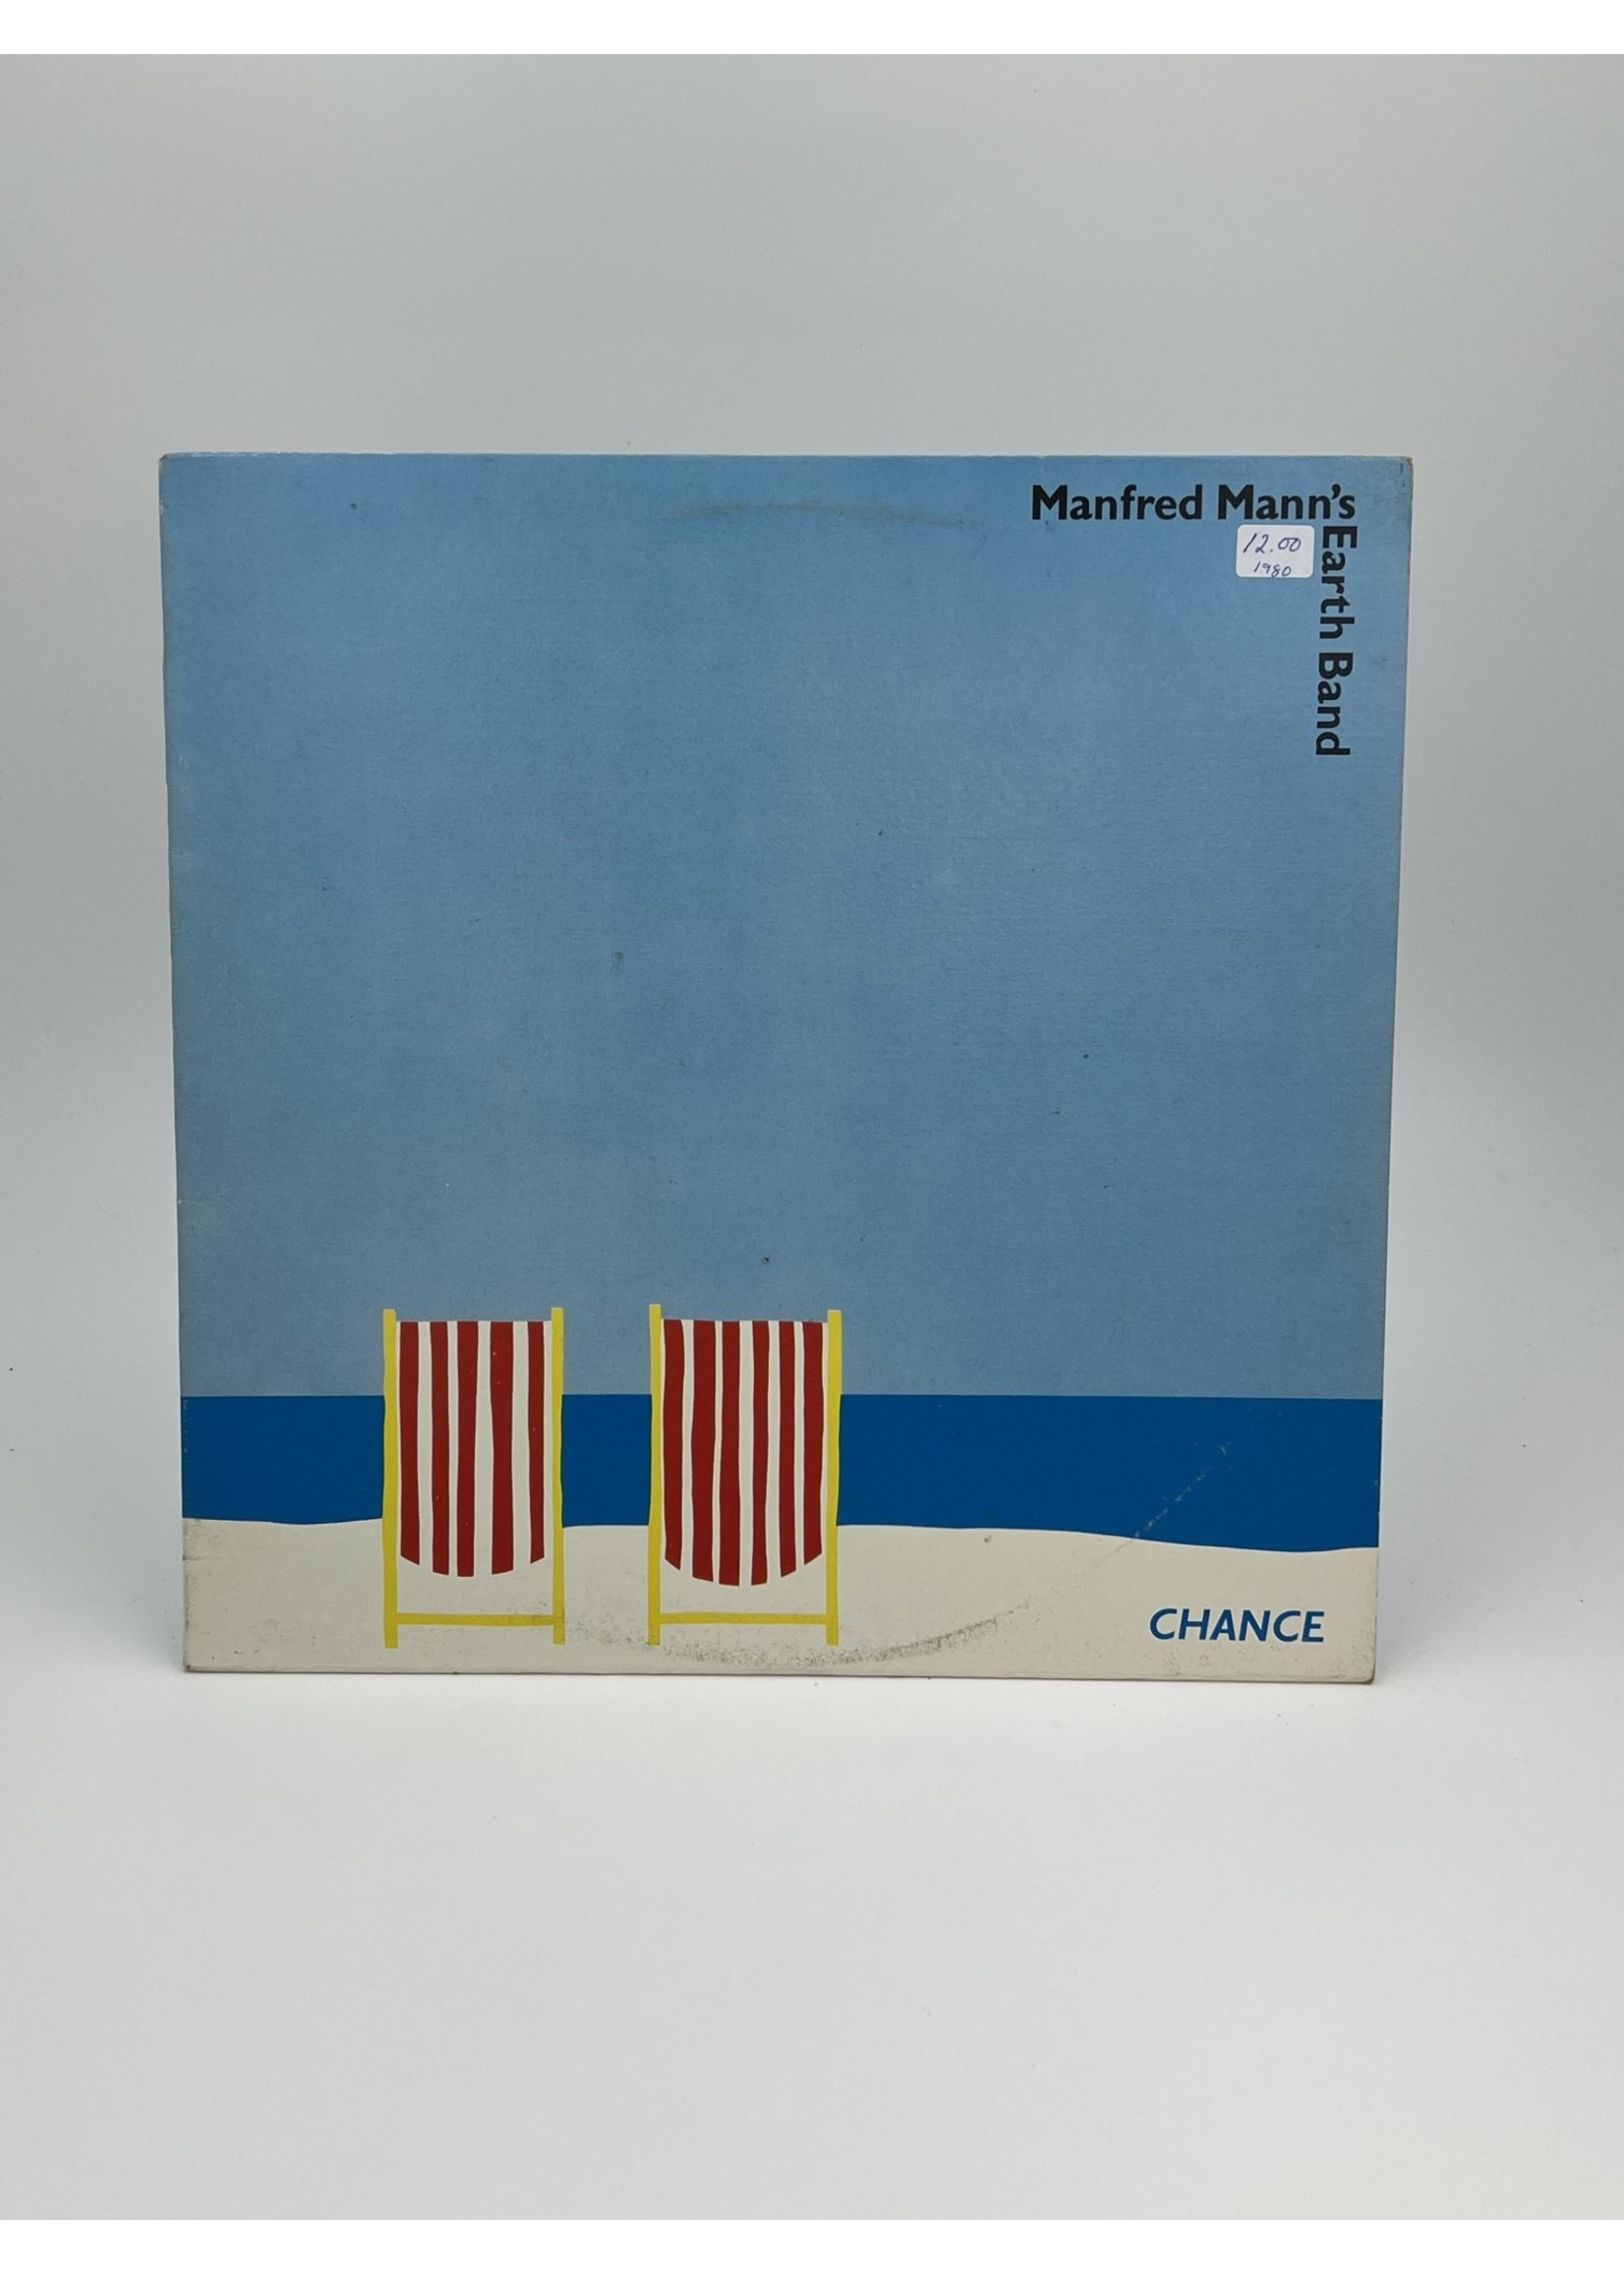 LP Manfred Manns Earth Band Chance LP Record